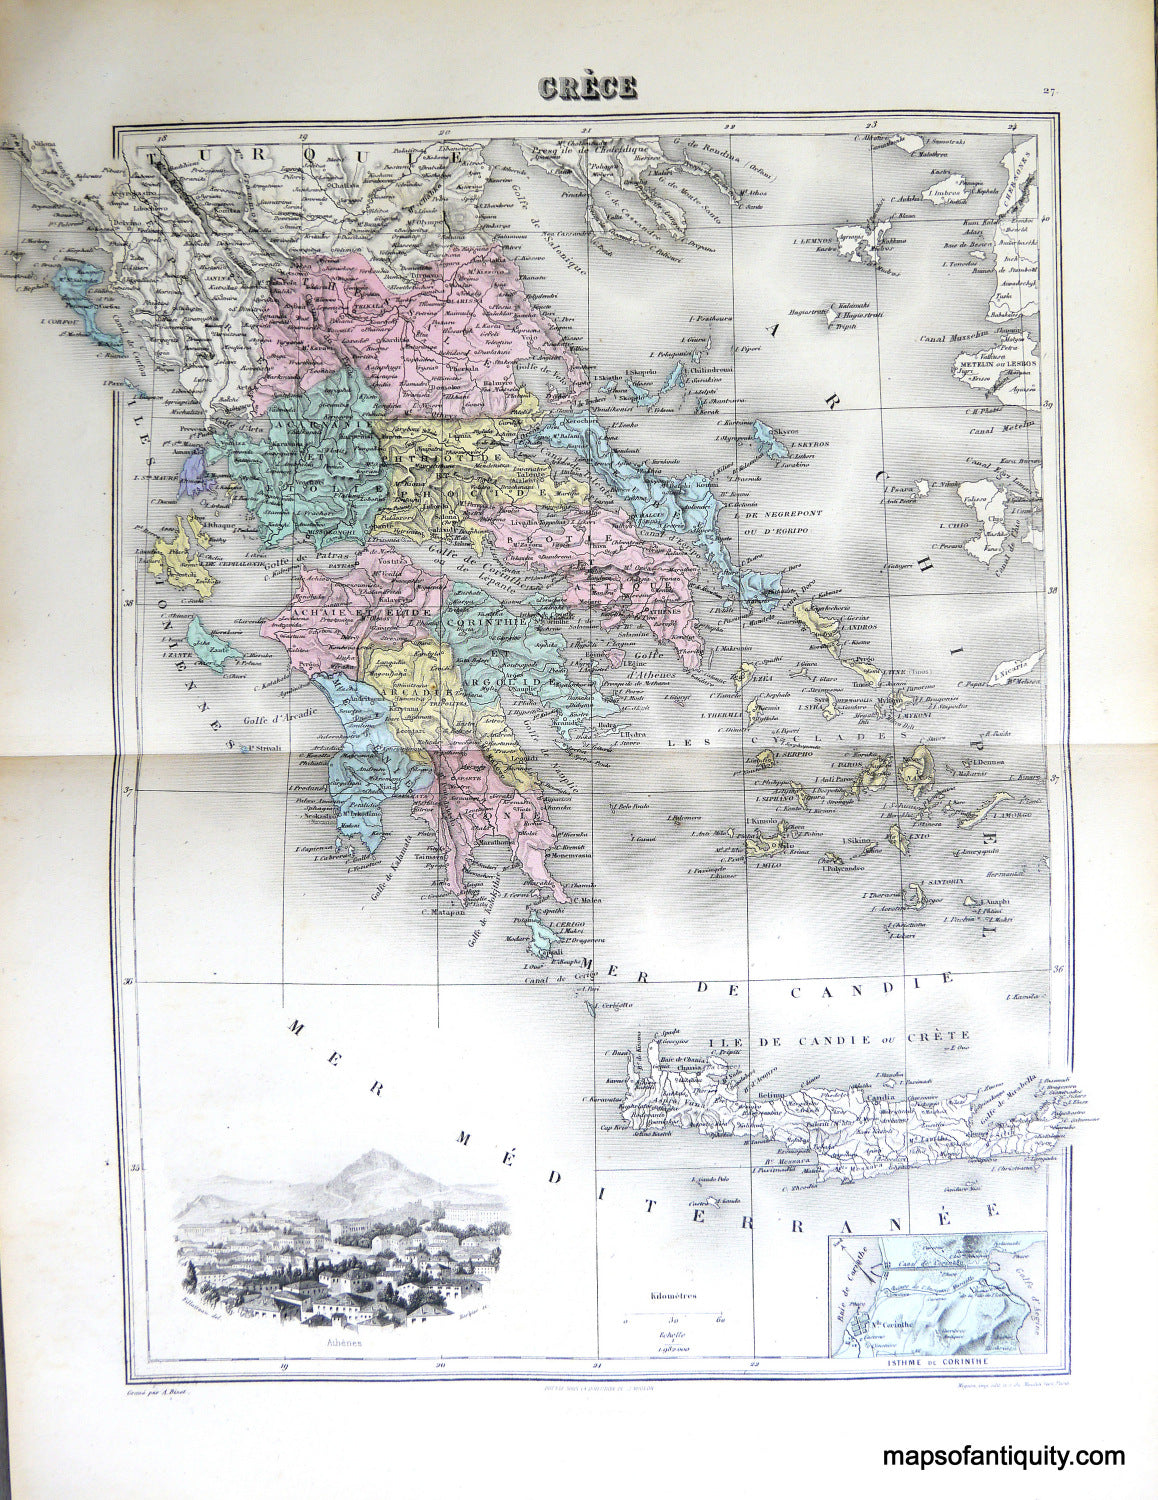 Antique-Hand-Colored-Map-1883-Migeon-Grece-Greece